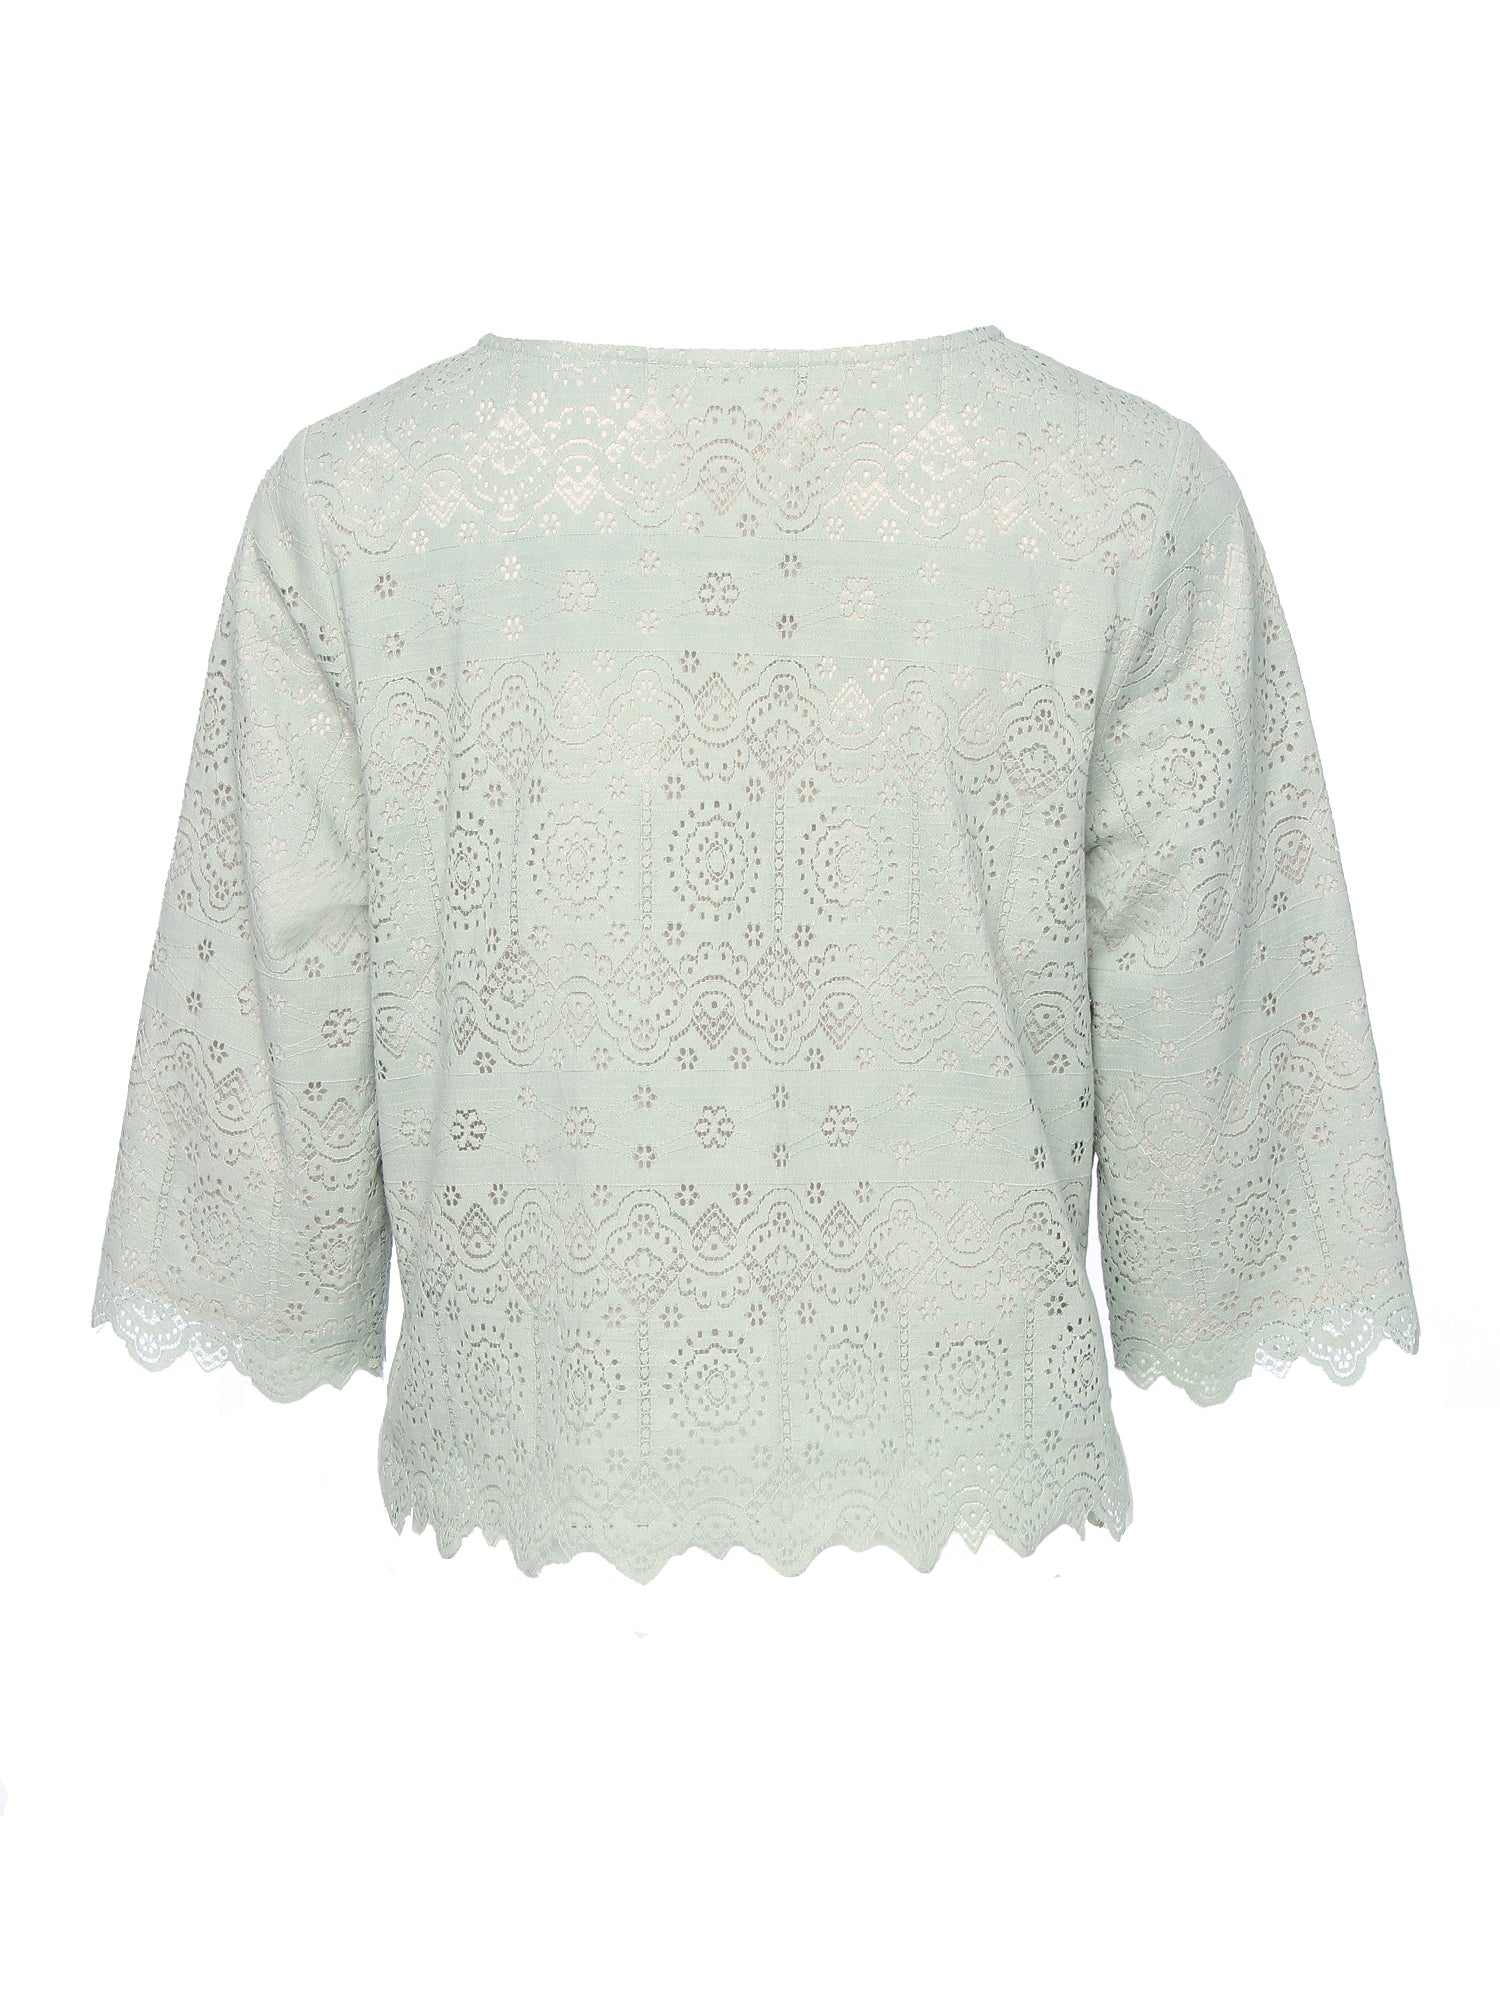 Deena Lace Scalloped Top